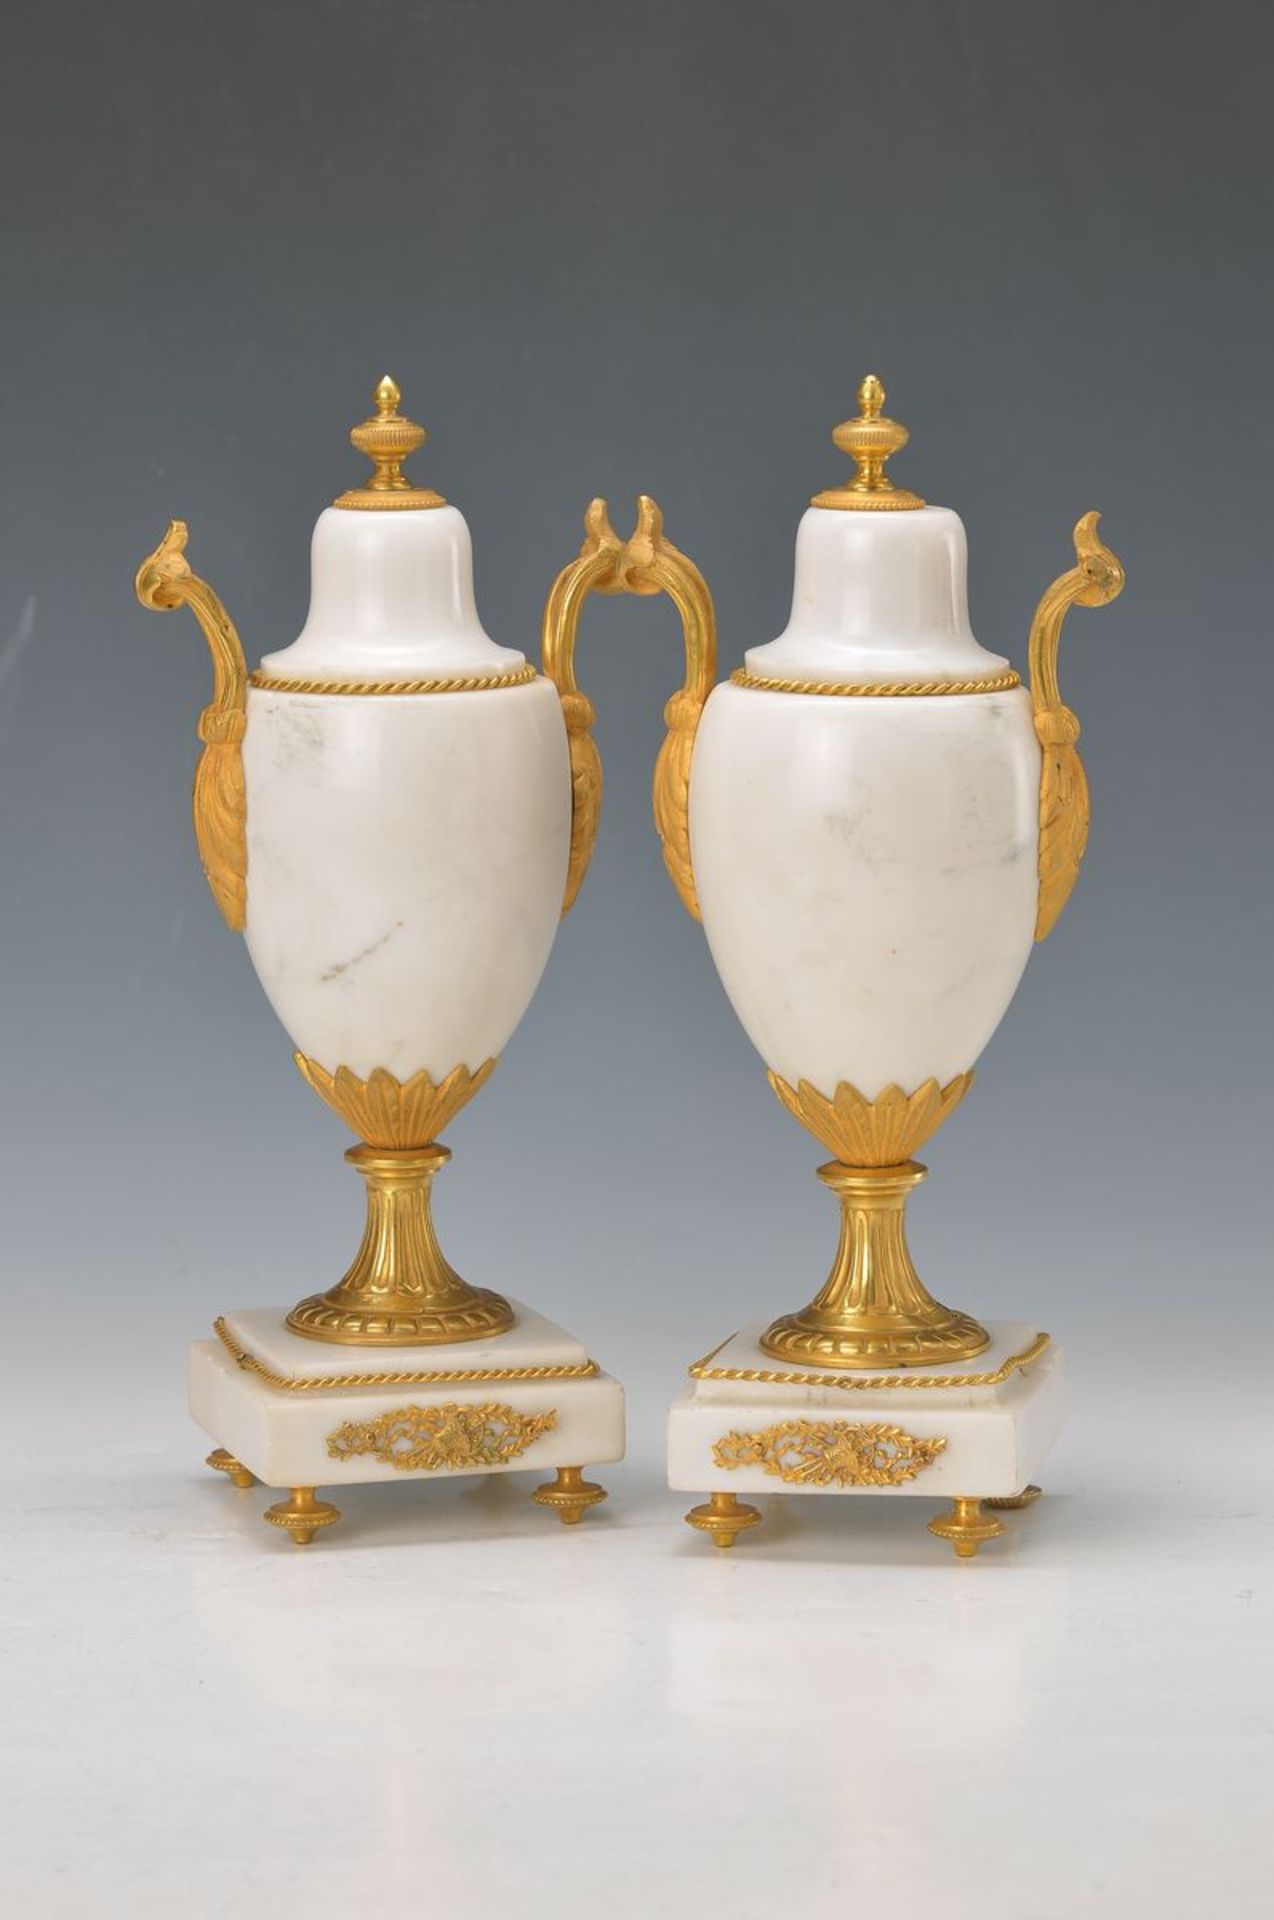 2 side pieces for one French Pendulum, France , around 1850, marble, in style of the Empire,Bronze